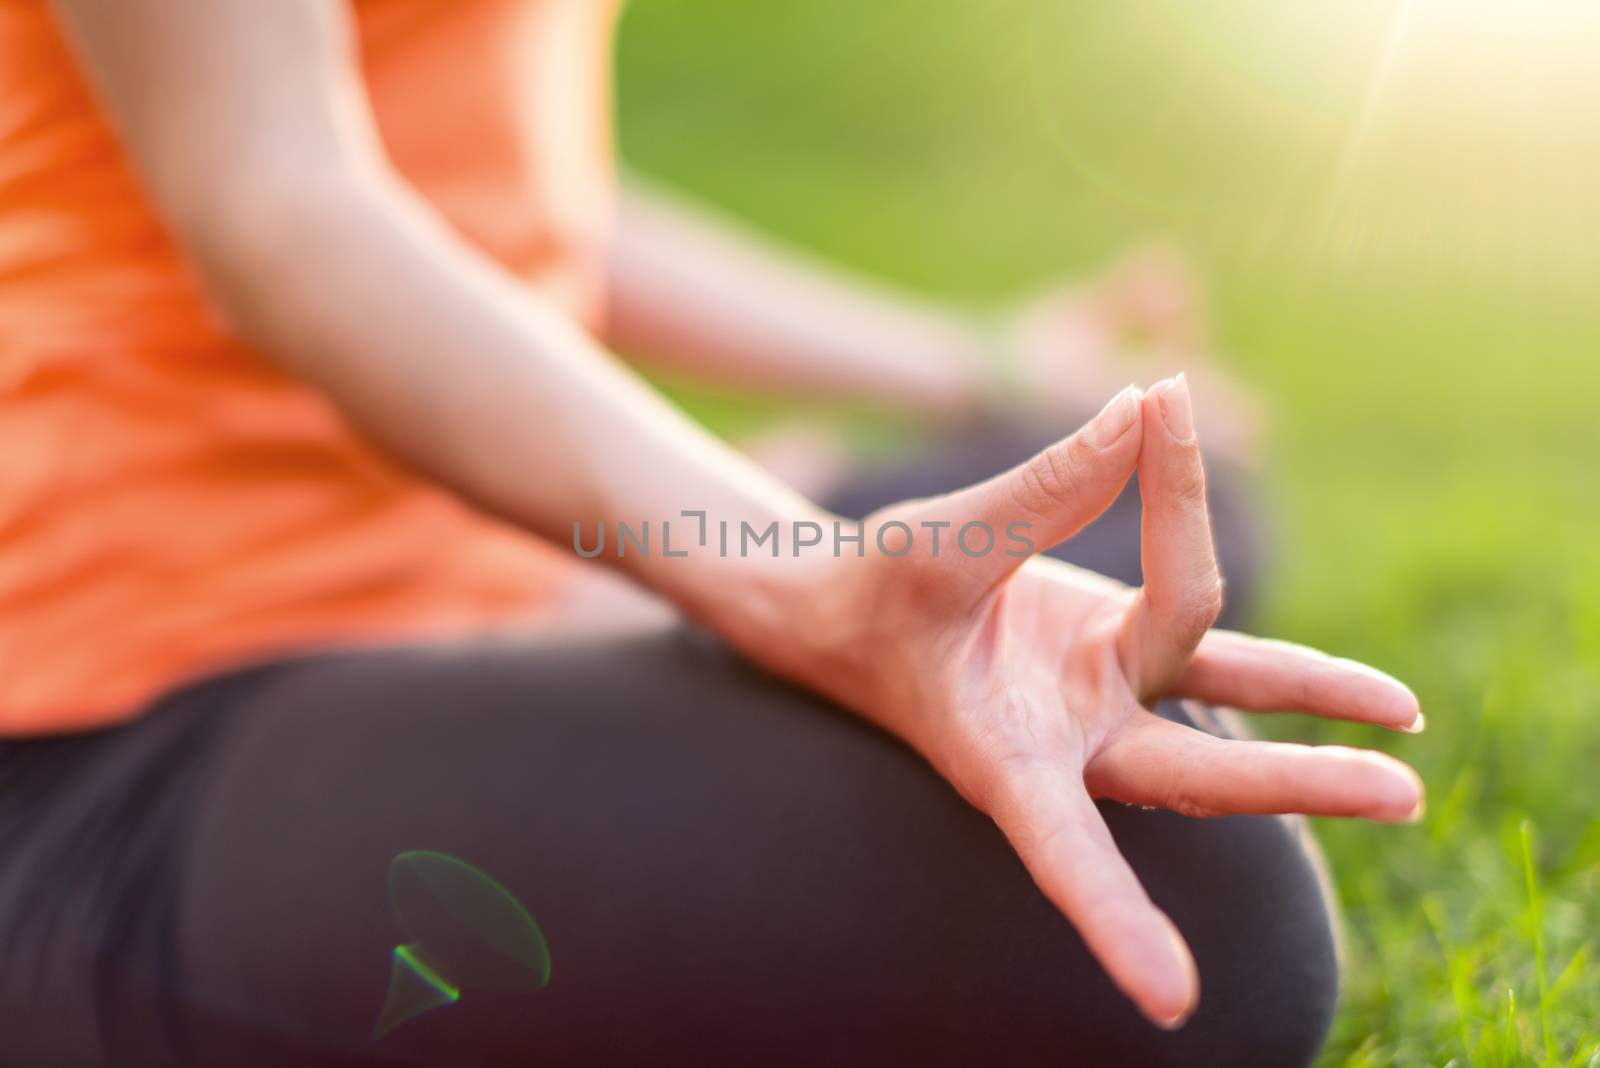 Hand detail of a girl meditation and taking yoga poses at sunset under trees